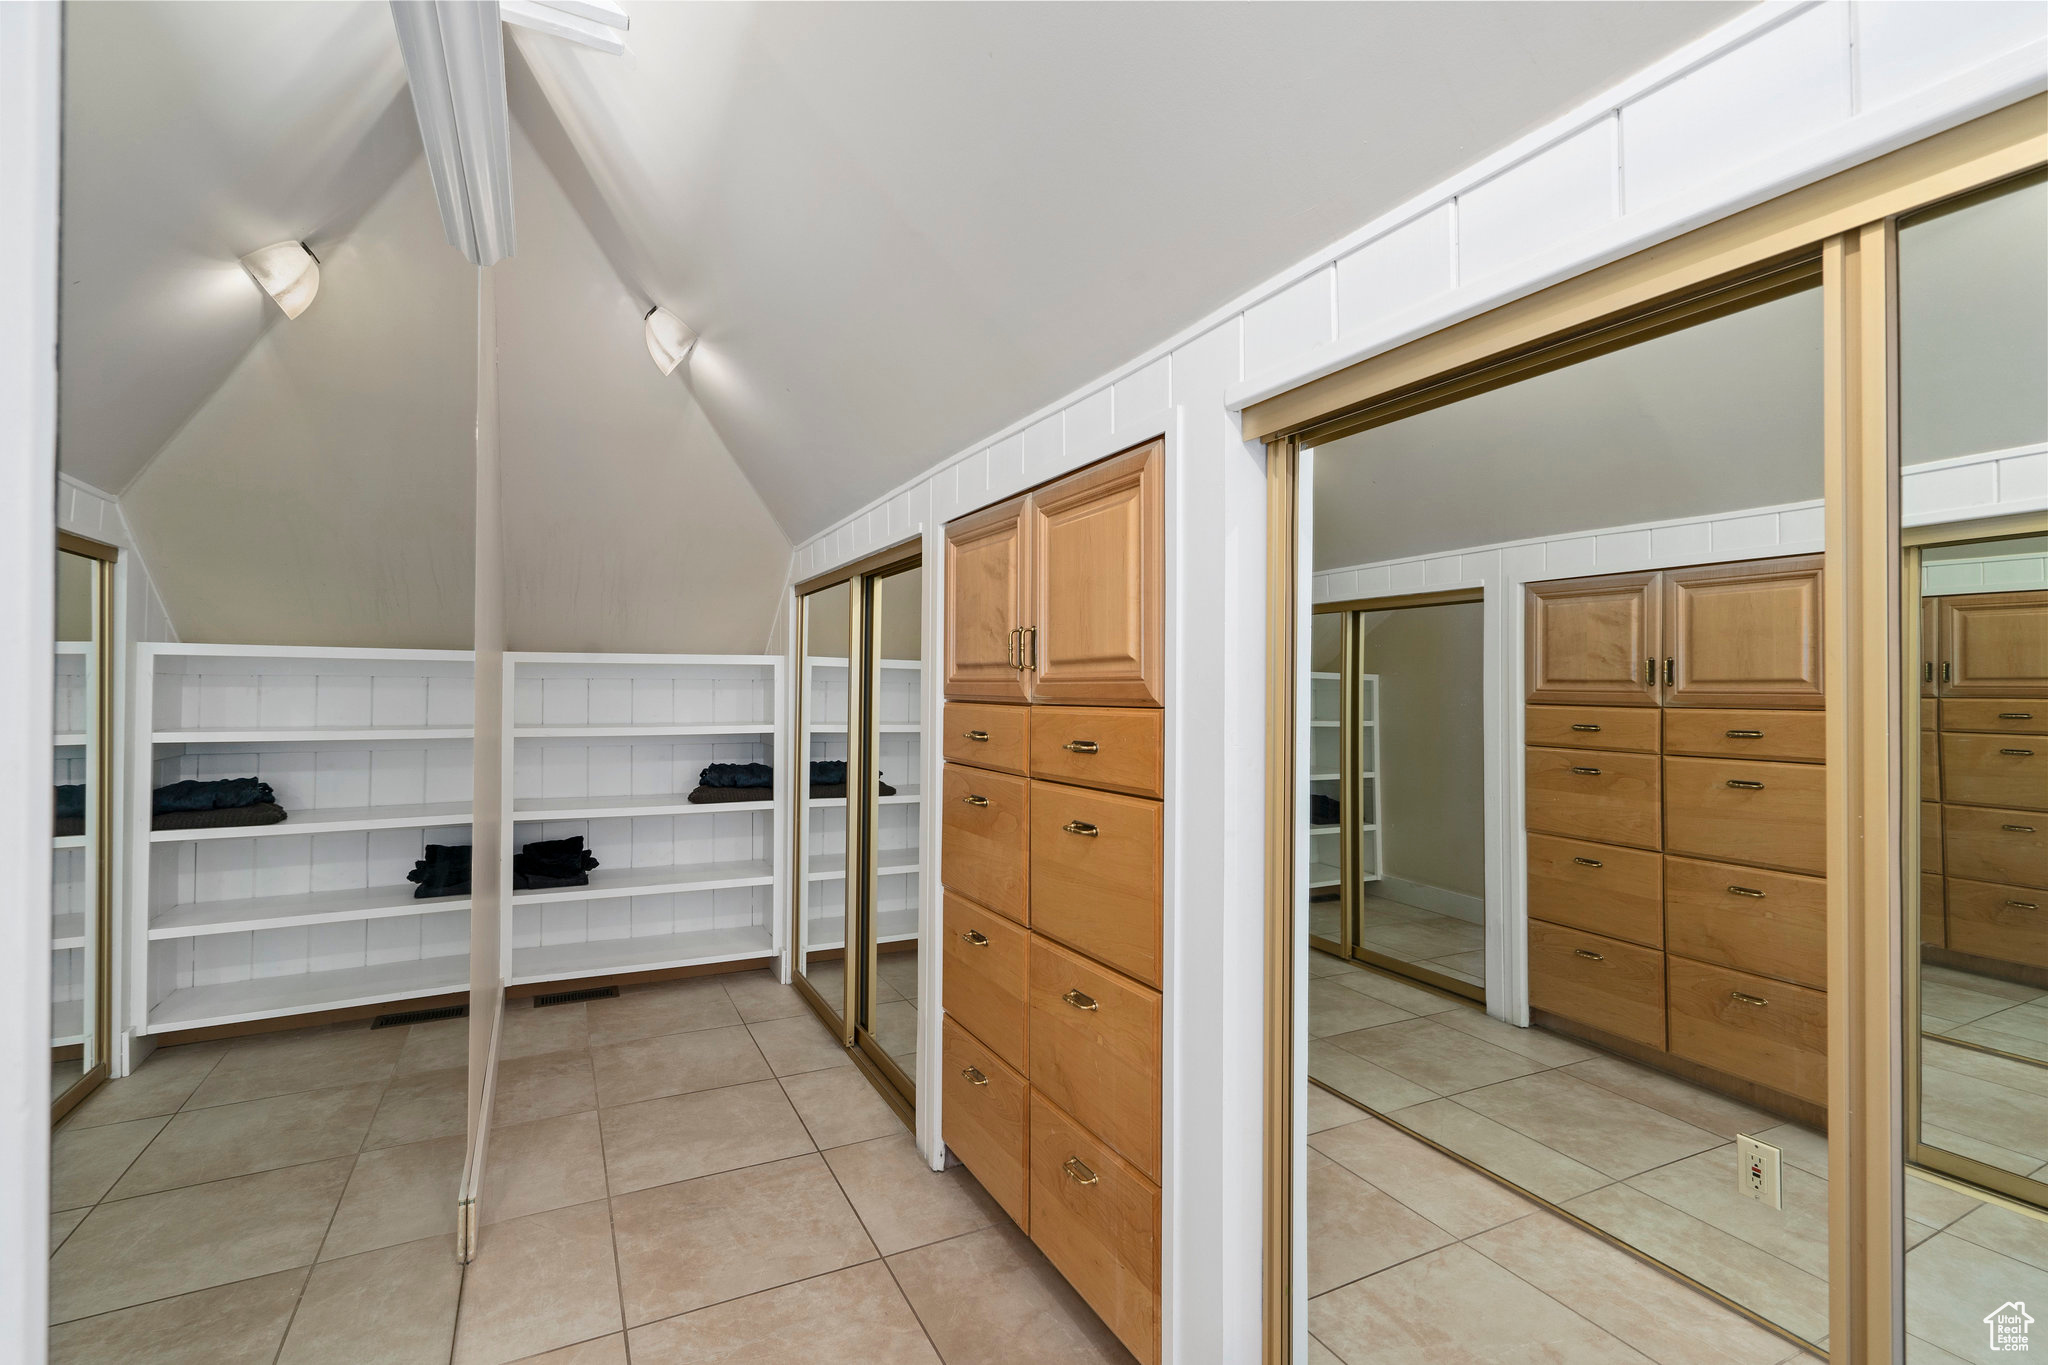 Master walk-in closet with lofted ceiling and light tile floors as part of the master bathroom.